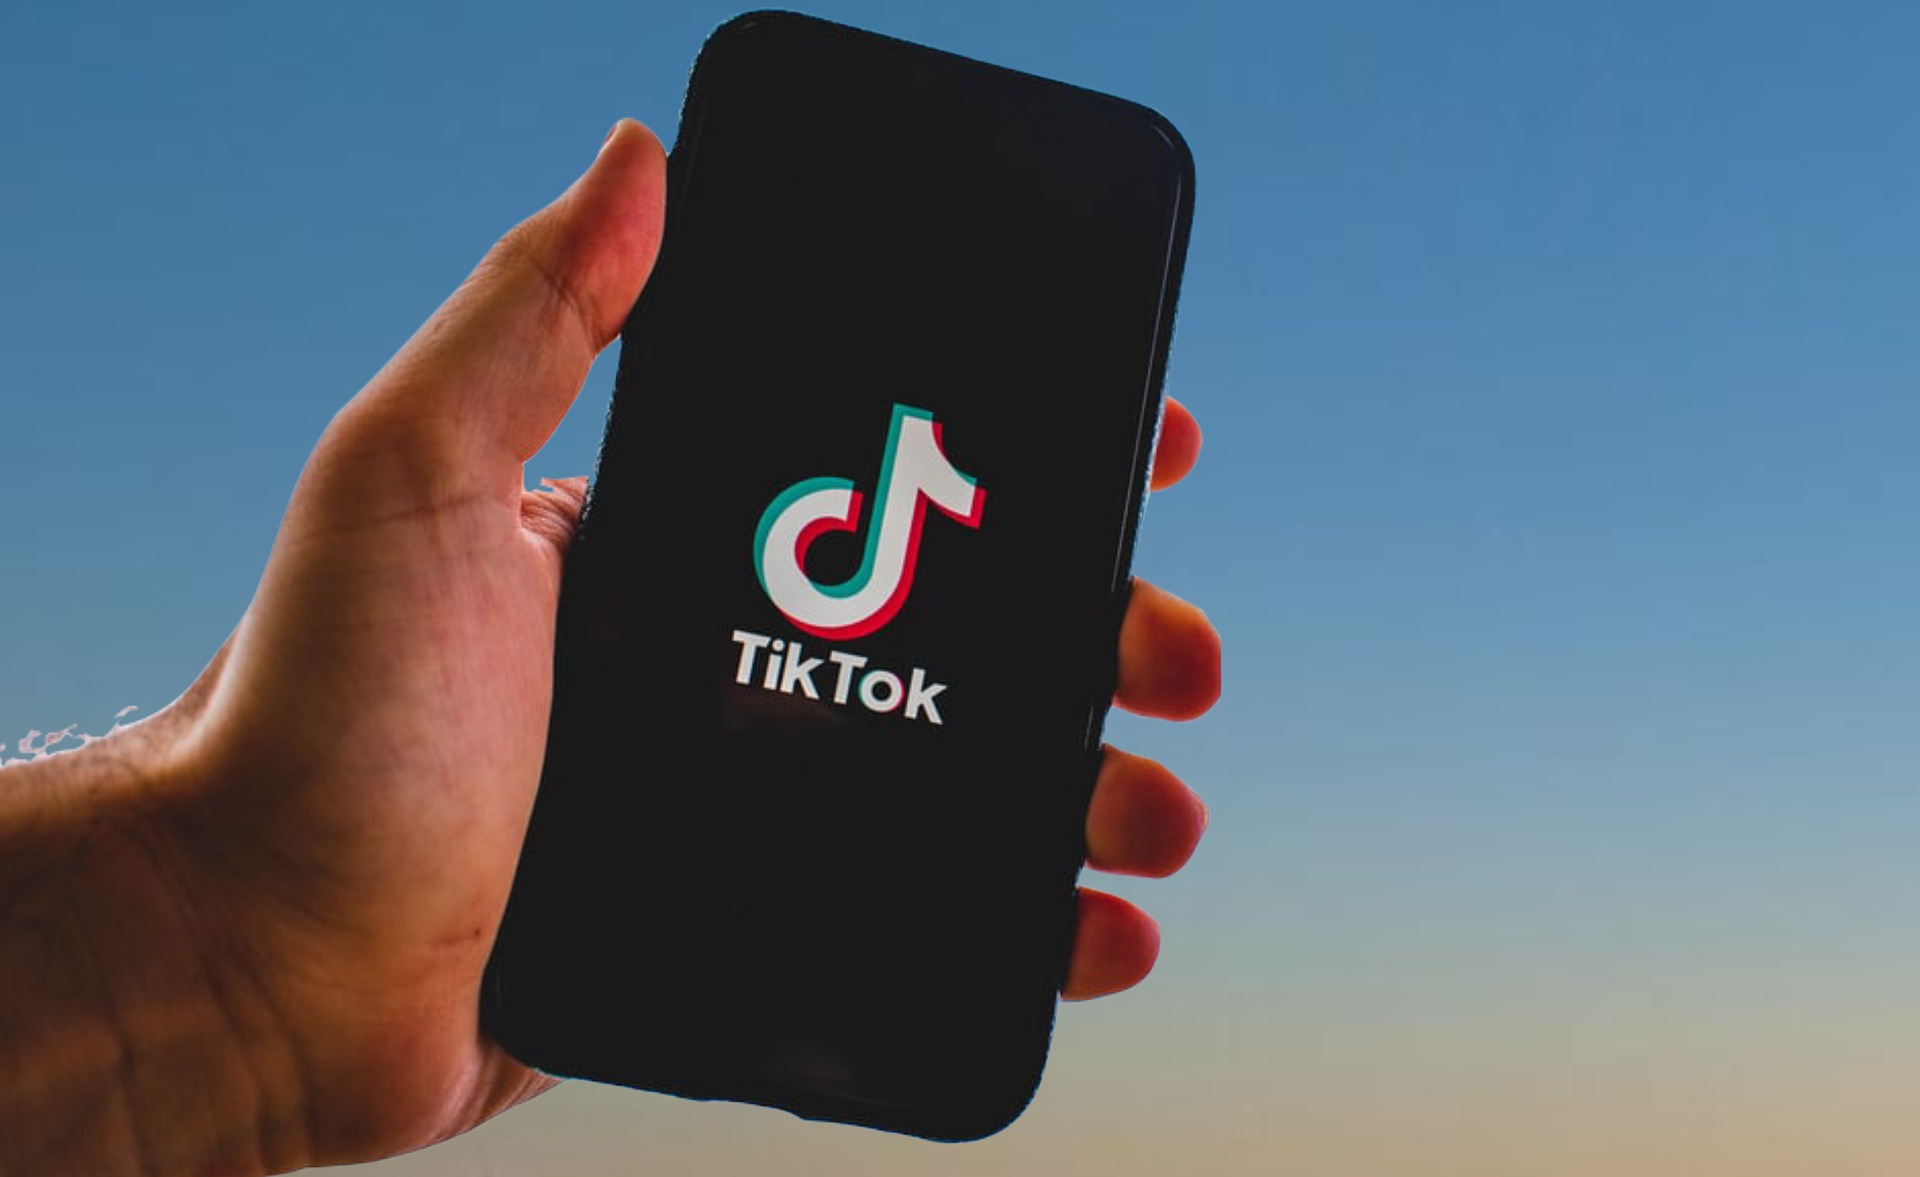 BBC Advises Staff to Remove TikTok from Corporate Devices